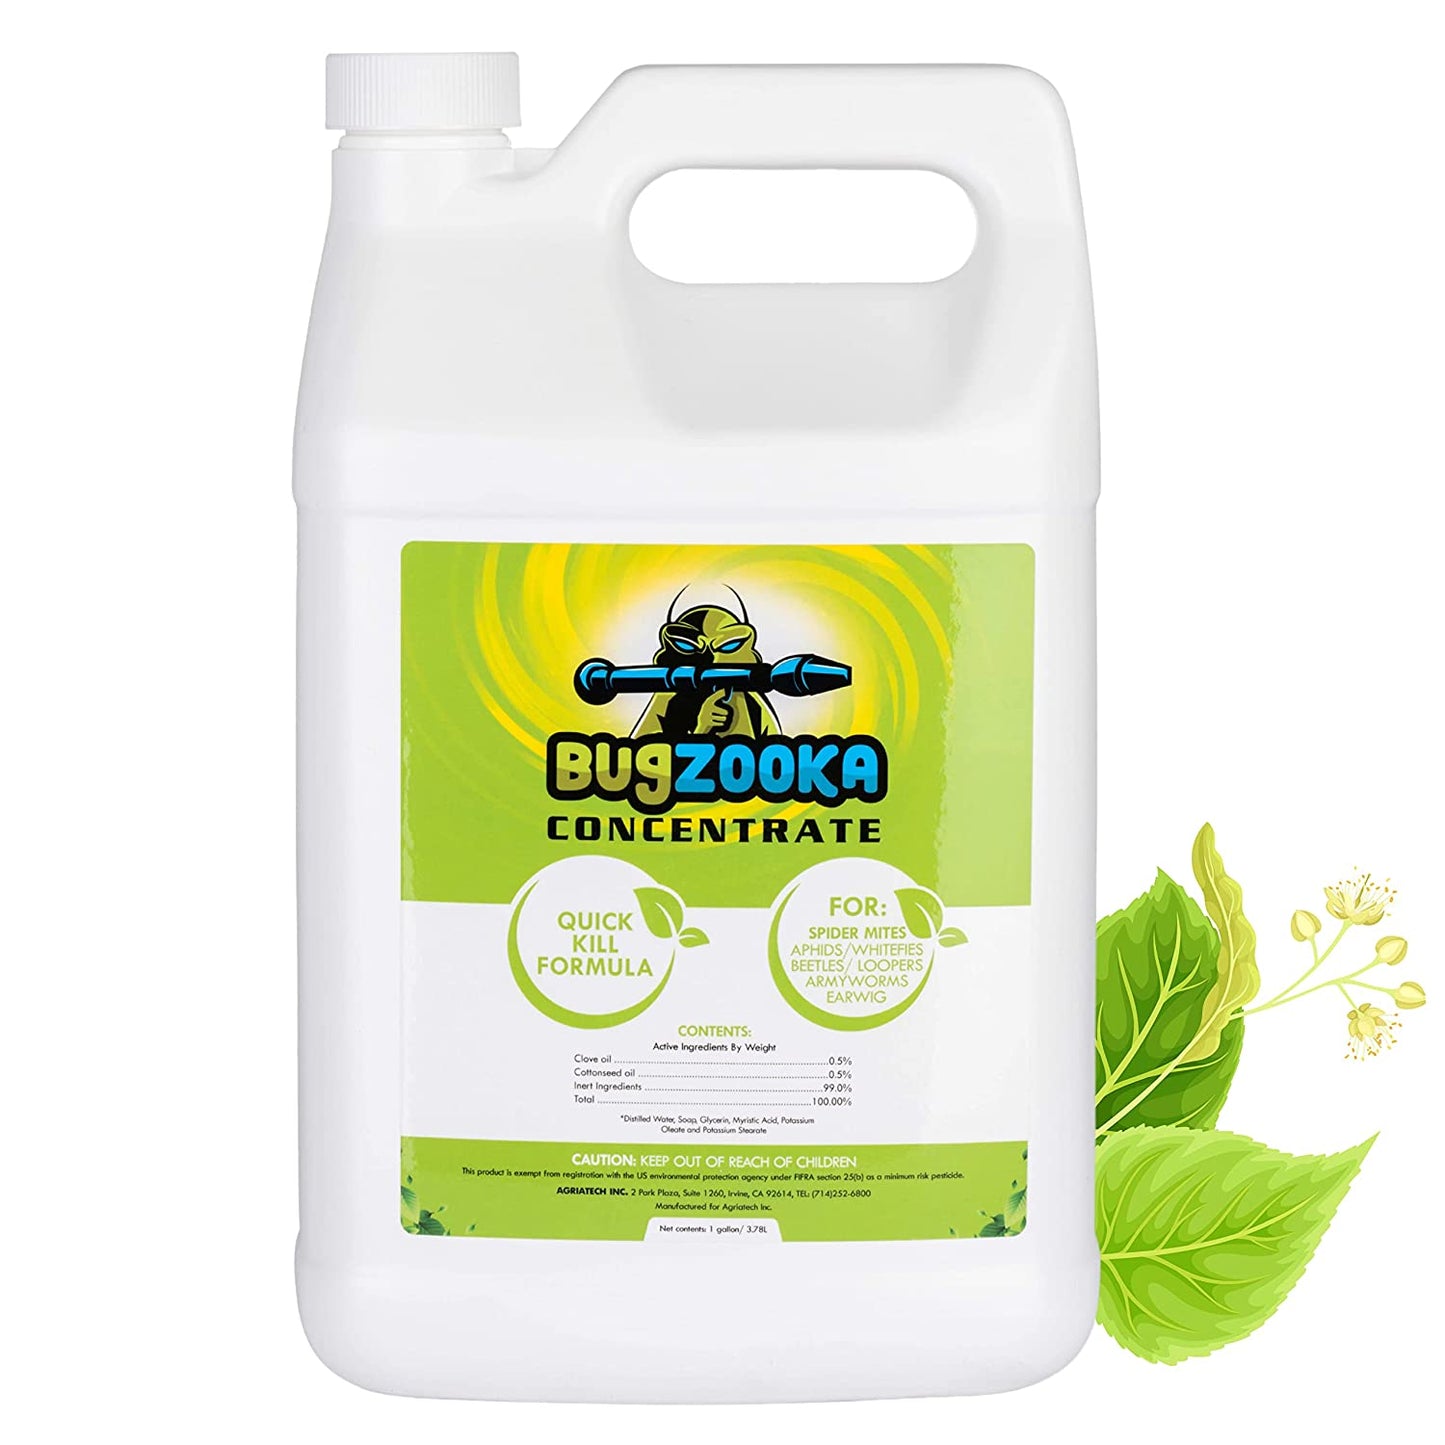 BugZooka Outdoor Bug Spray Insect Killer Concentrate with Essential Oils, All-in-One Natural Insecticide Spider Mite Insect Killer, Human & Animal Safe, 100% USDA Biobased, Made in USA, 1 Gallon